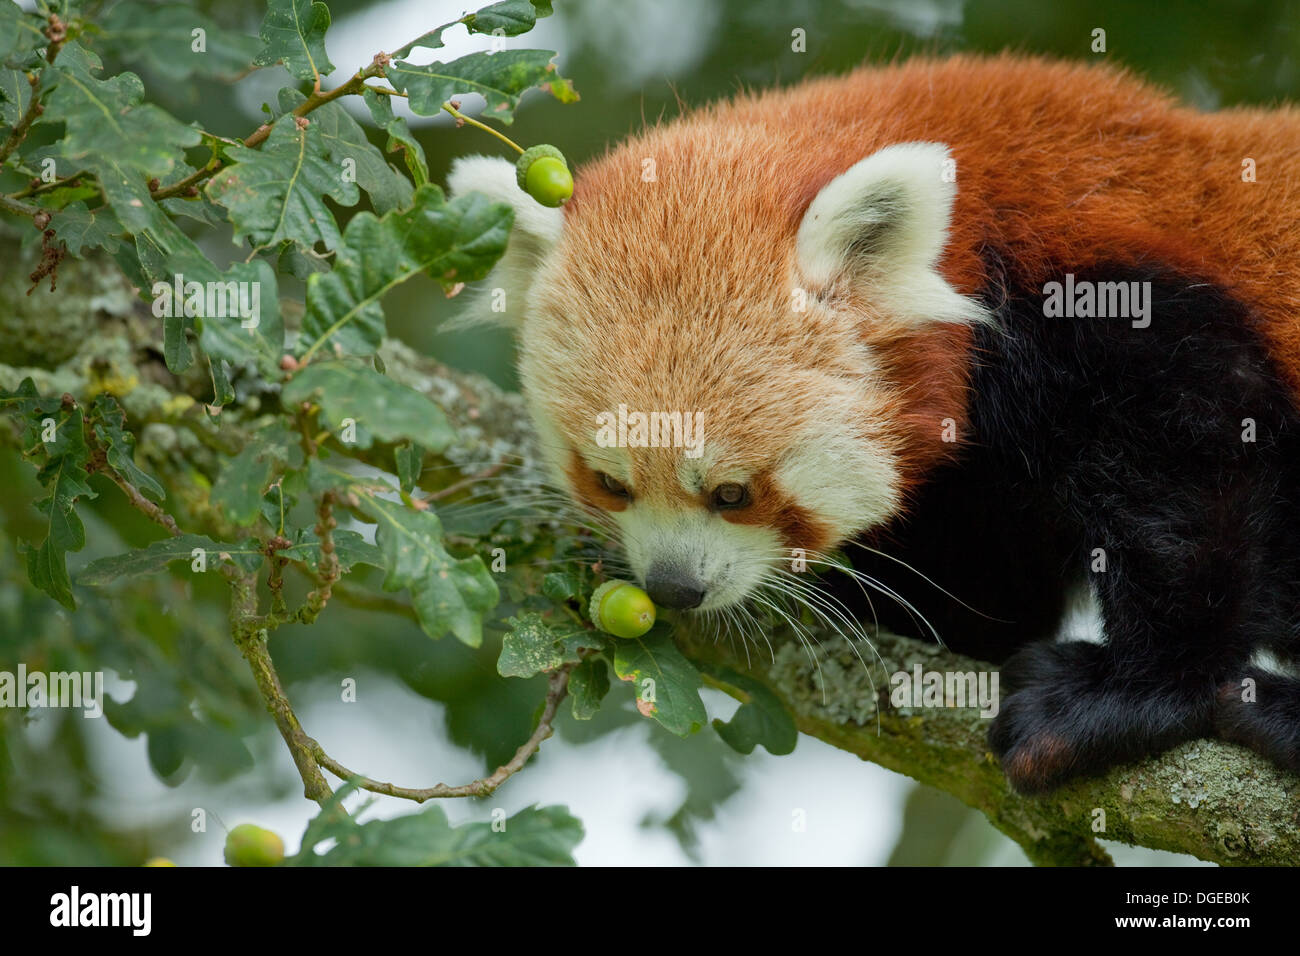 Red or Lesser Panda (Ailurius fulgens). Smelling an acorn in an Oak Tree. Stock Photo